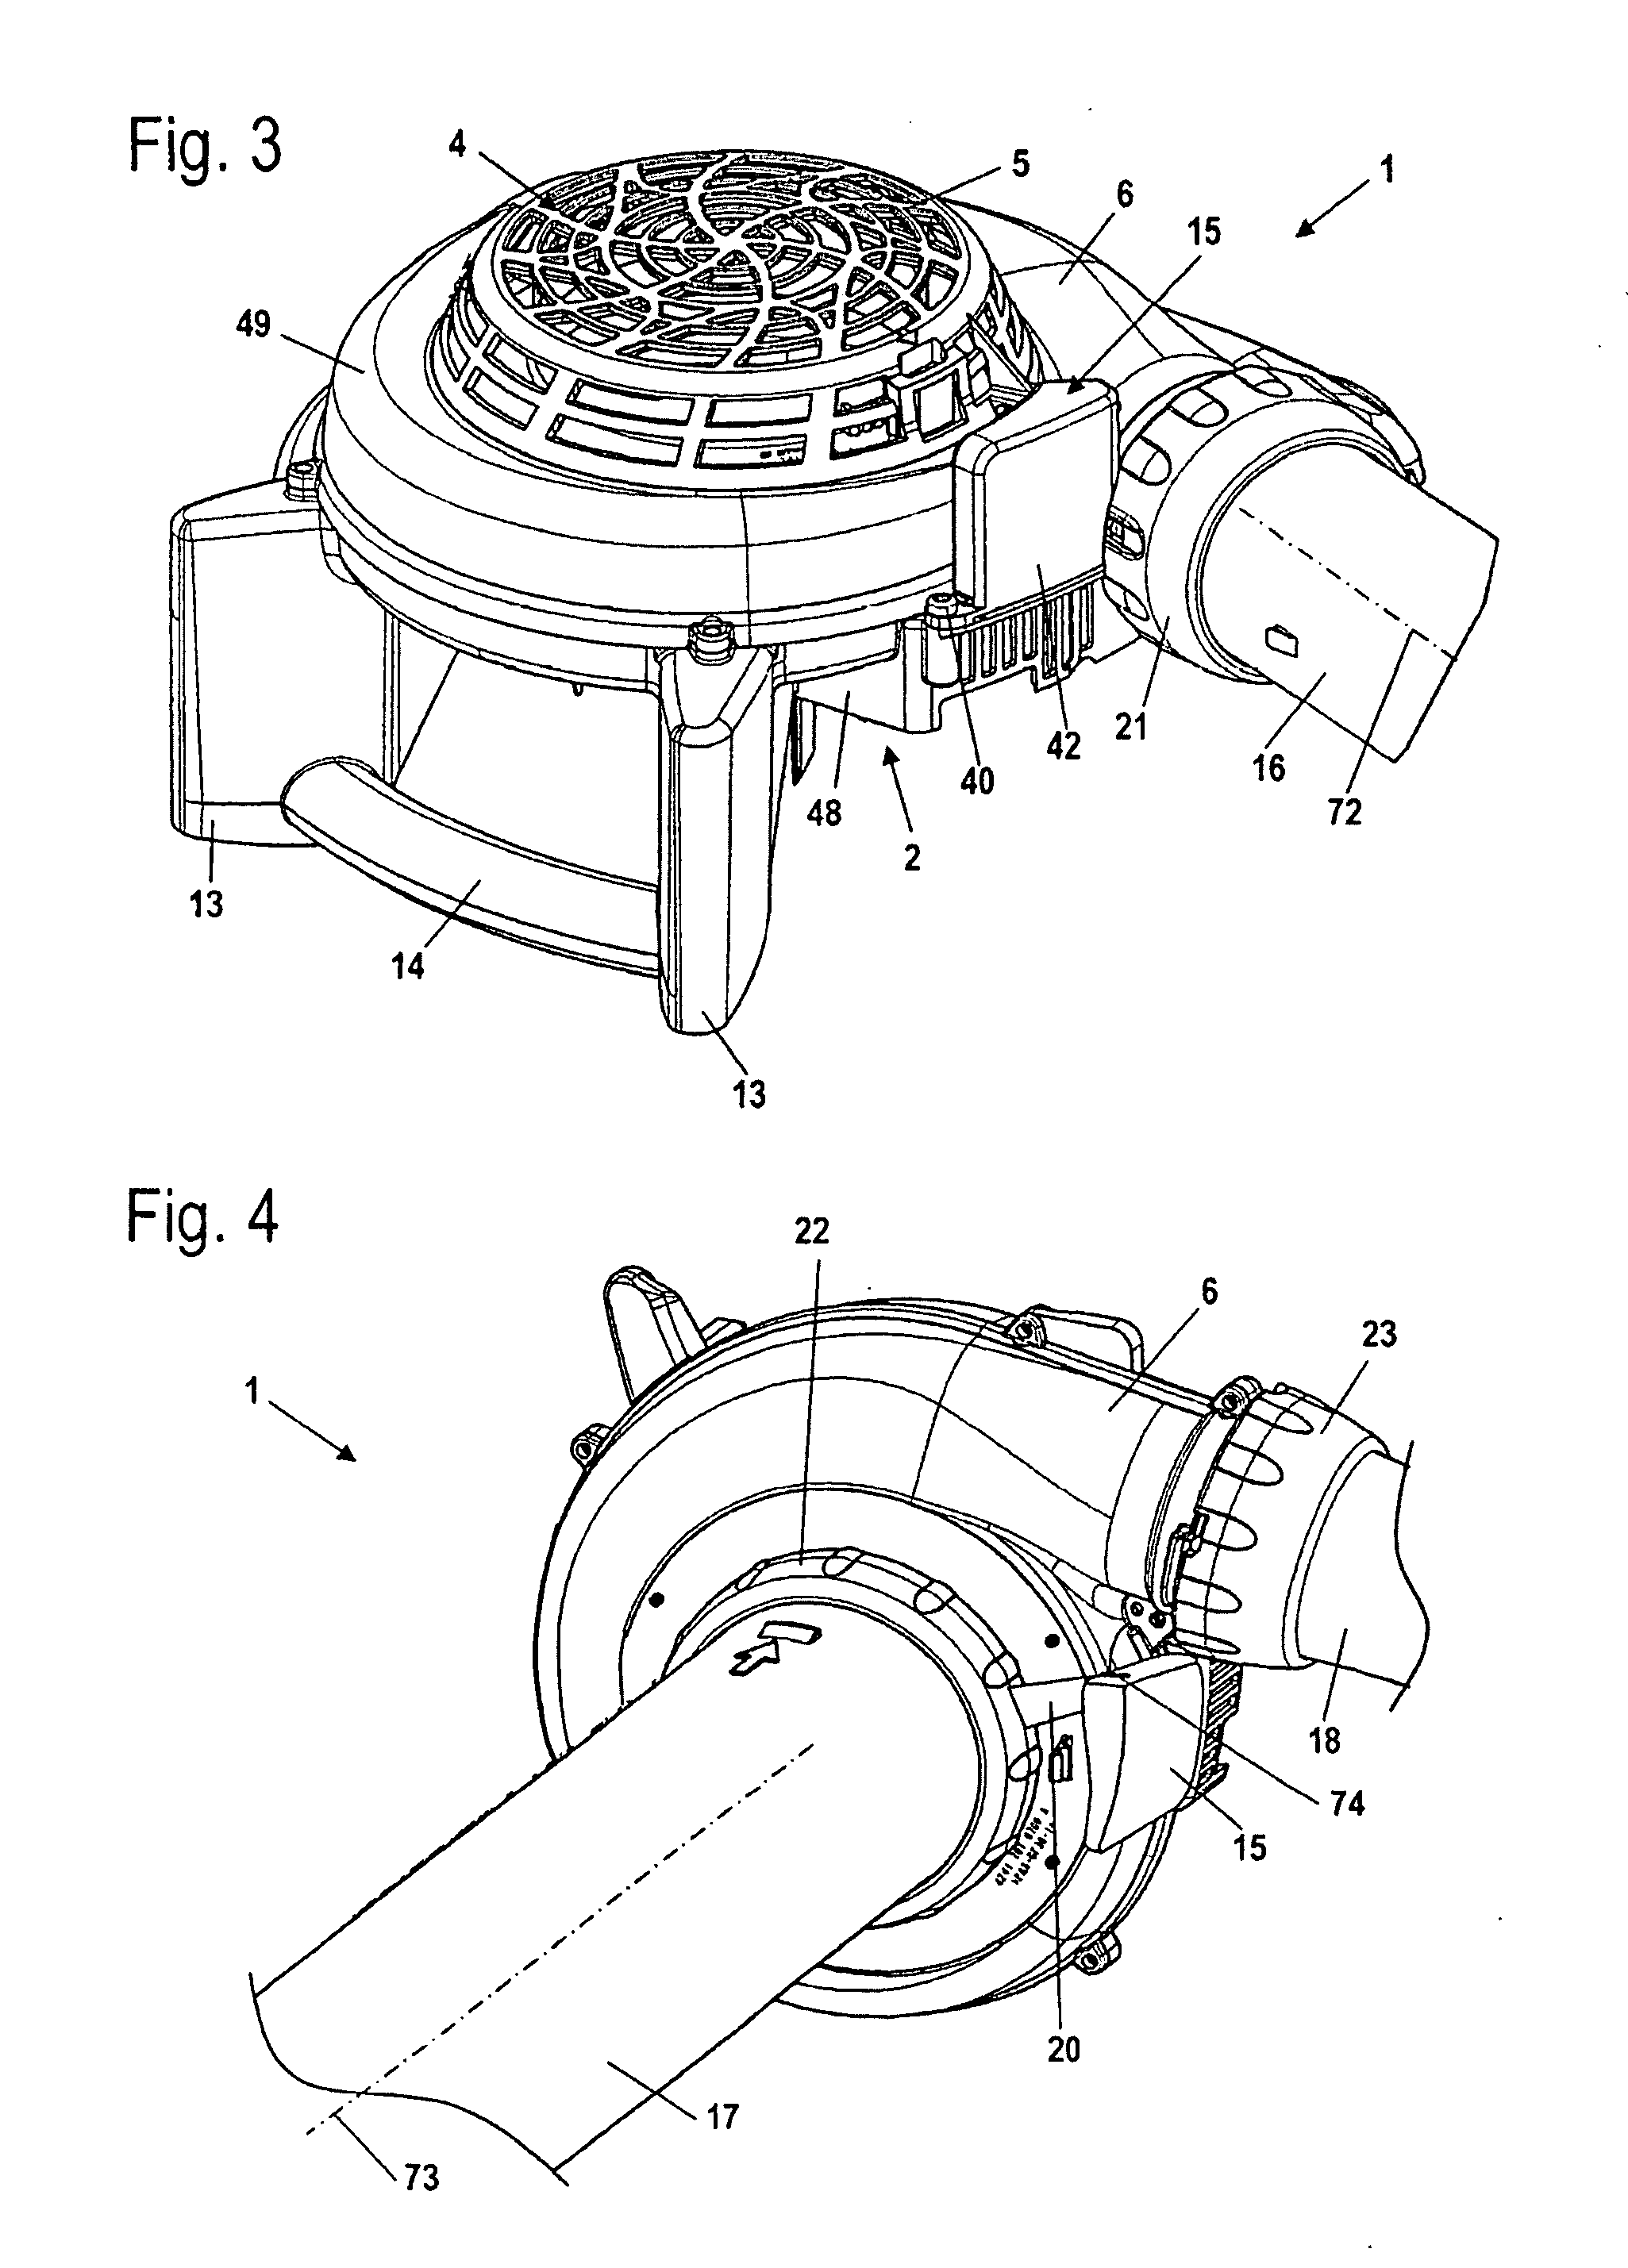 Manually guided blower